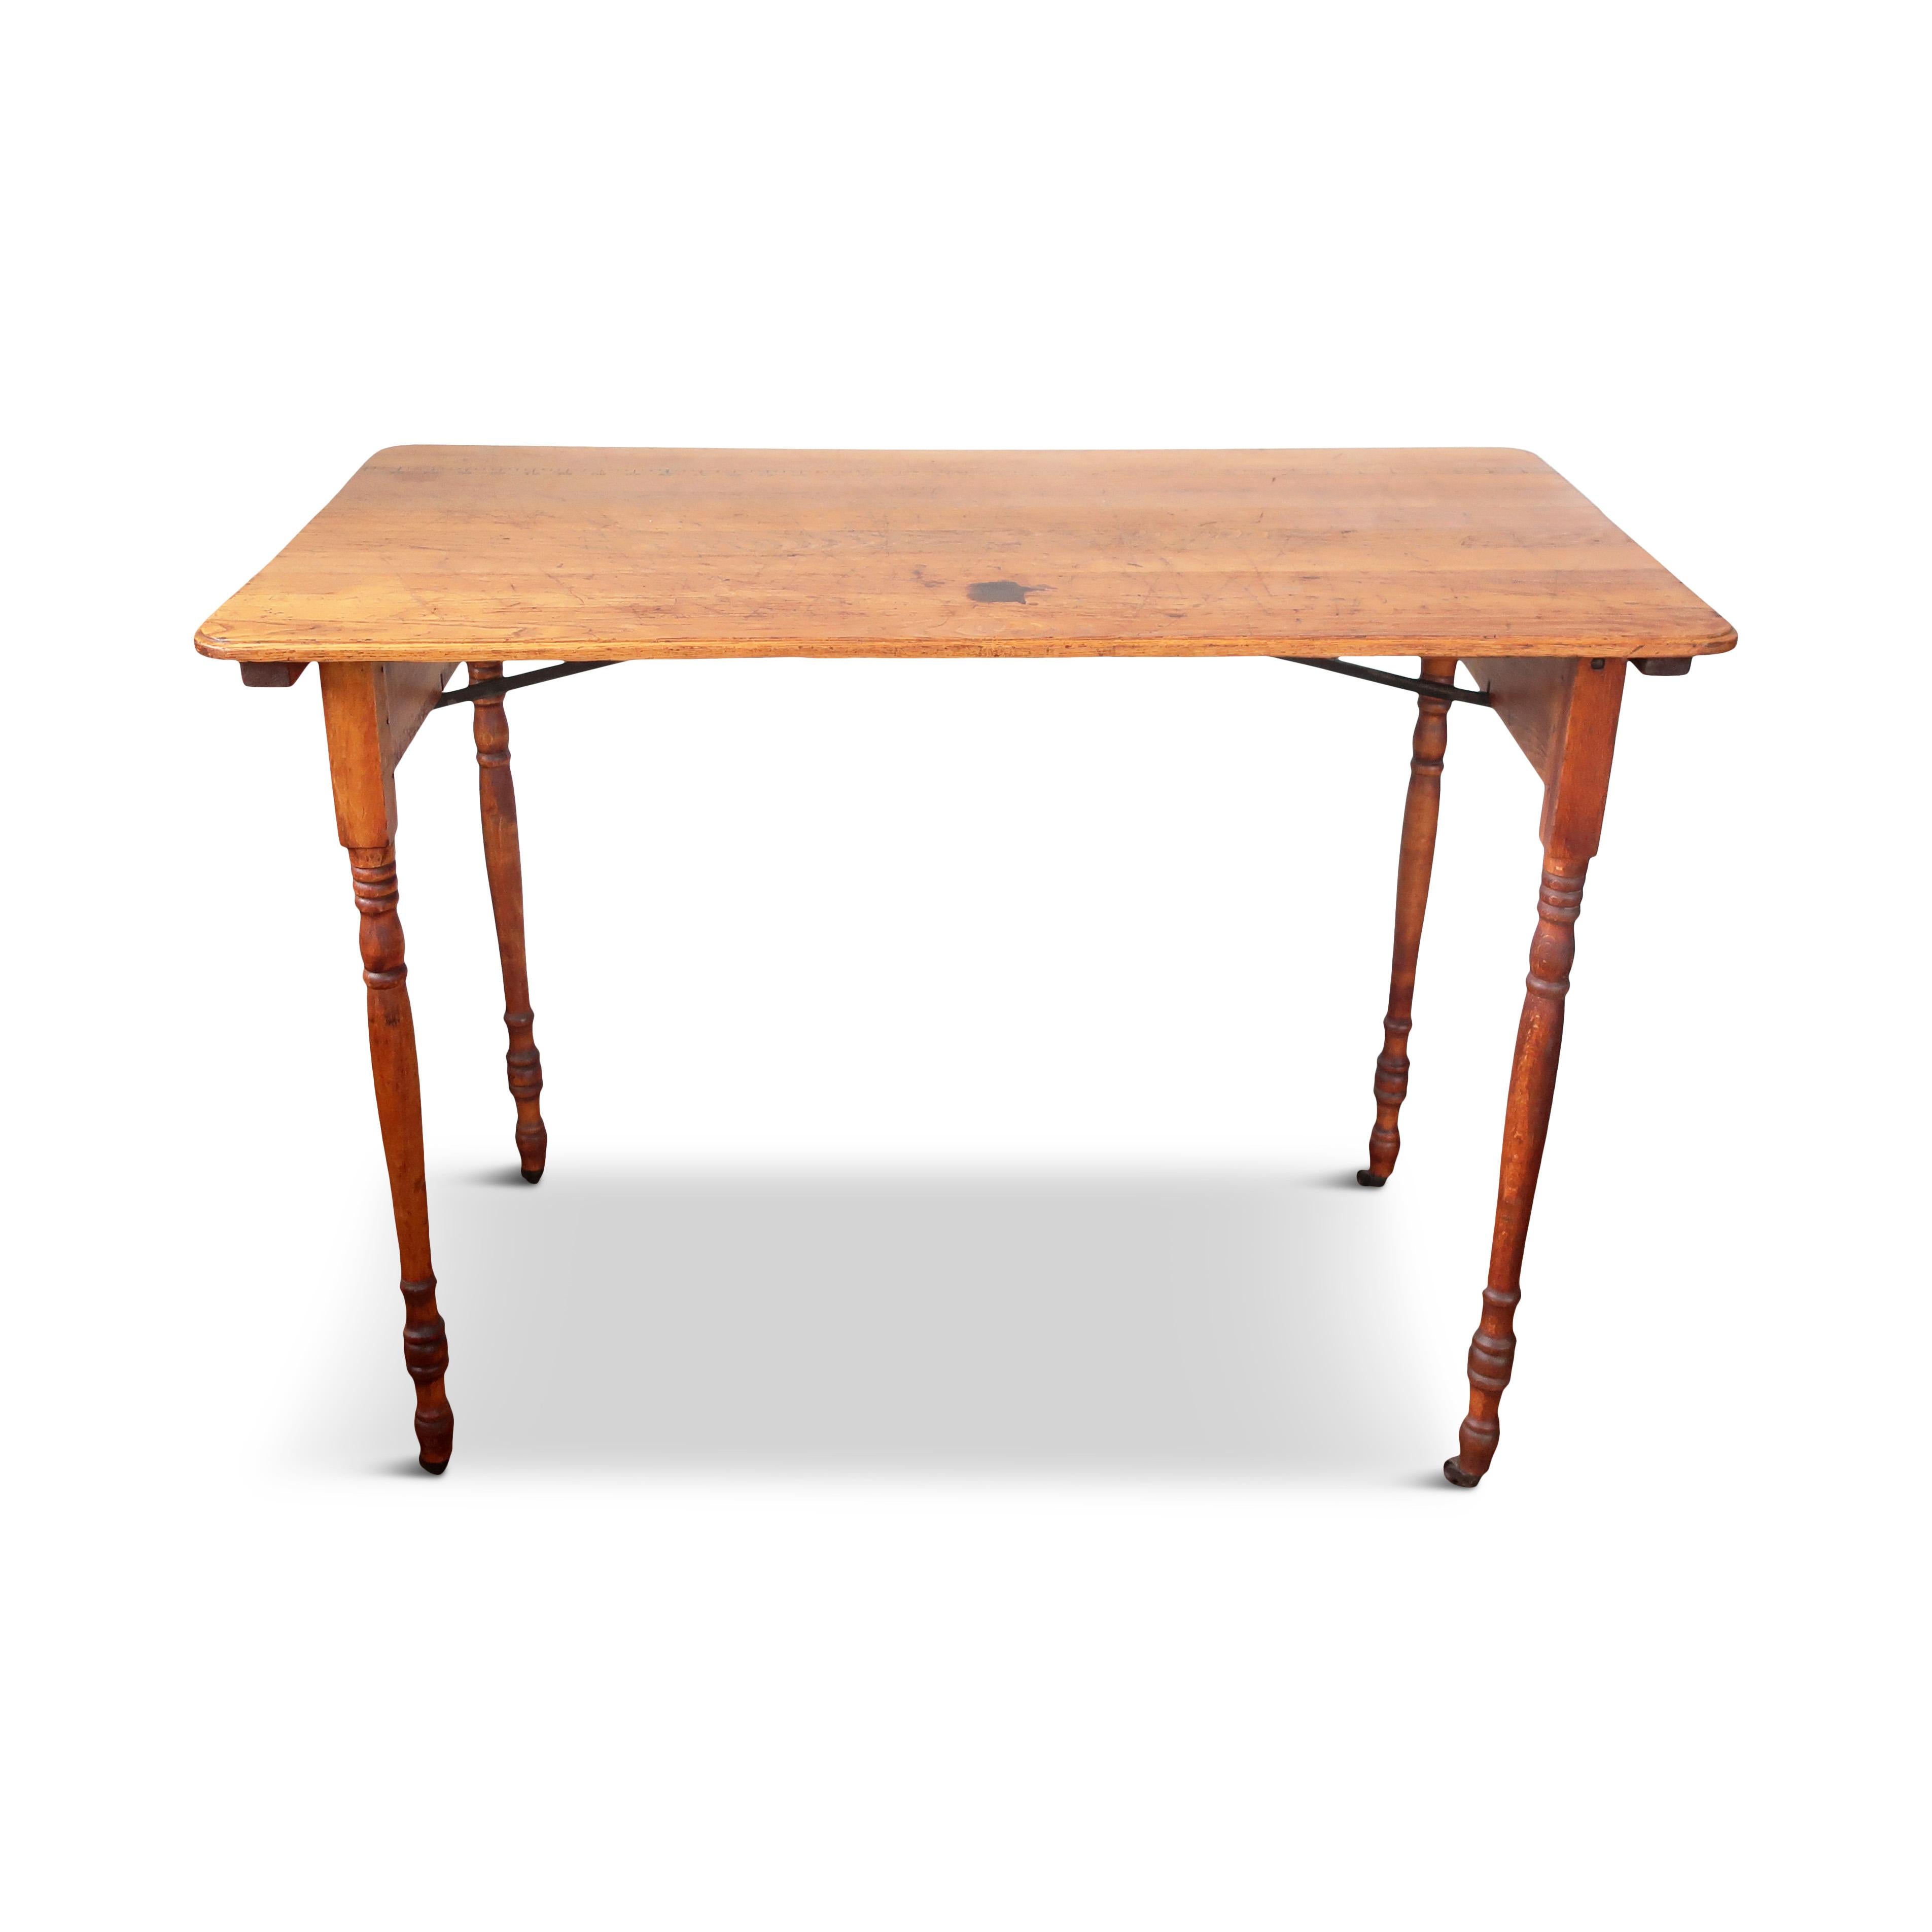 A unique and charming piece of sewing history, this antique wood folding sewing or tailor’s table from the 1800s is perfect for enthusiasts who appreciate the nostalgia and functionality of vintage sewing furniture. Practical and easy to store, the